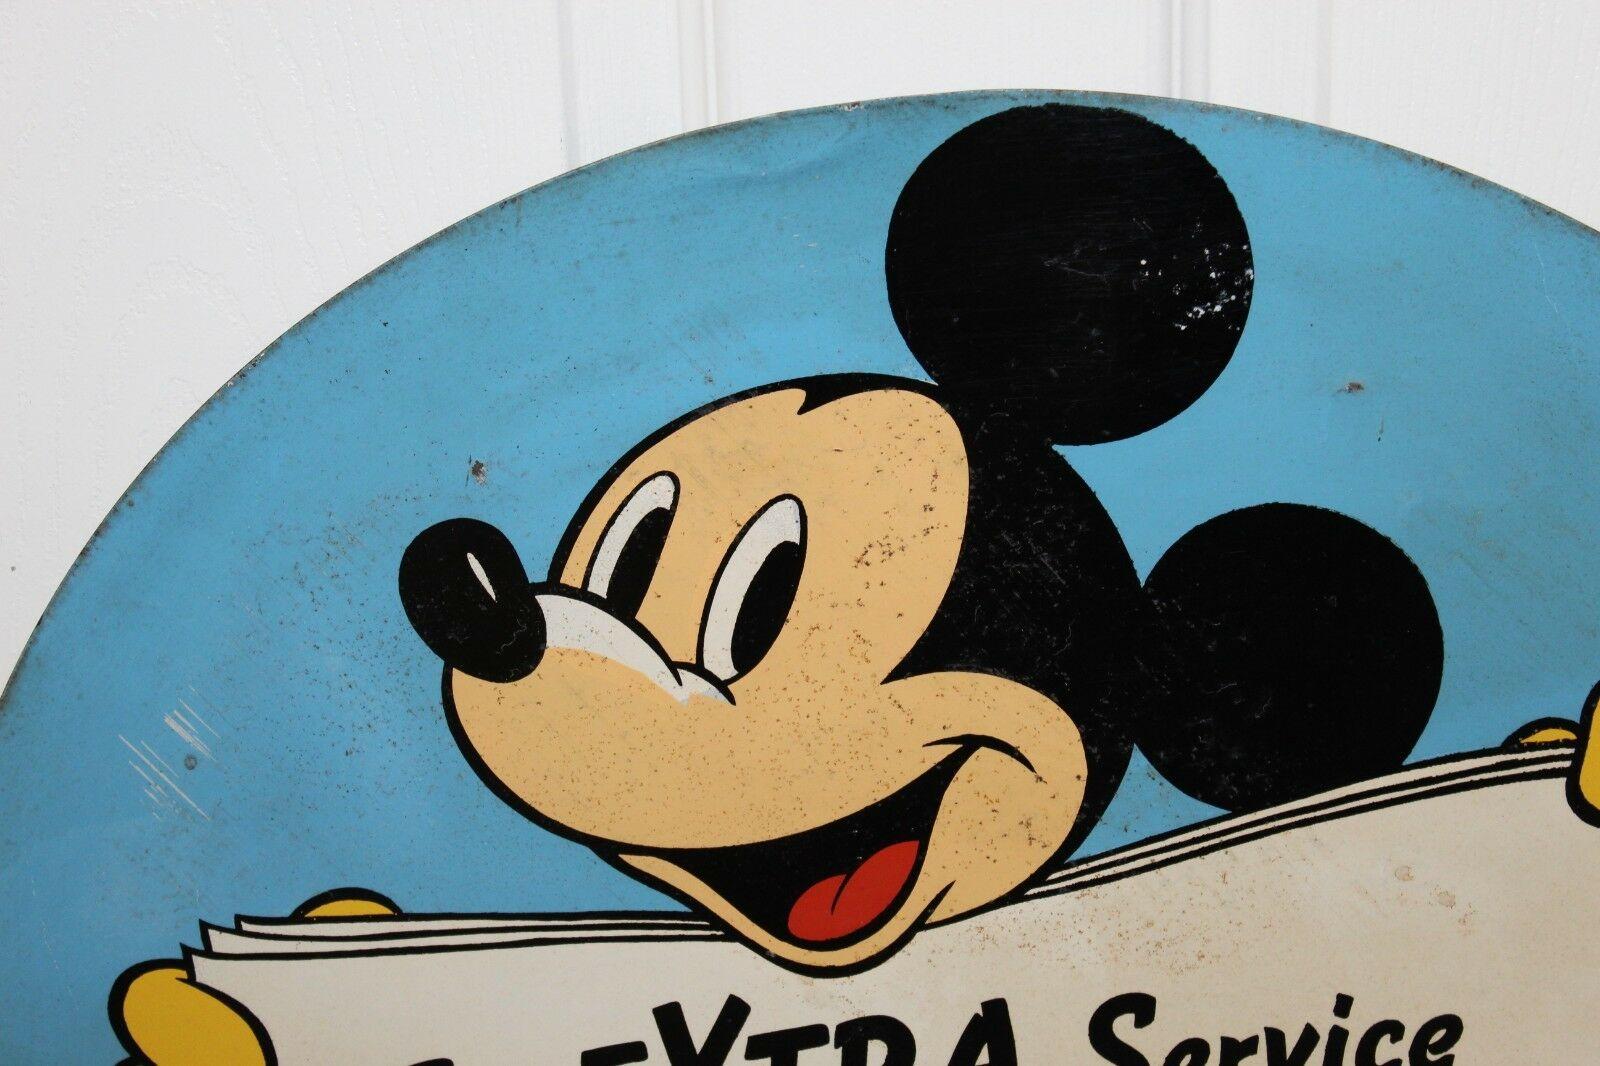 1940 Standard Gasoline Advertising with Disney's Mickey Mouse For Sale 1